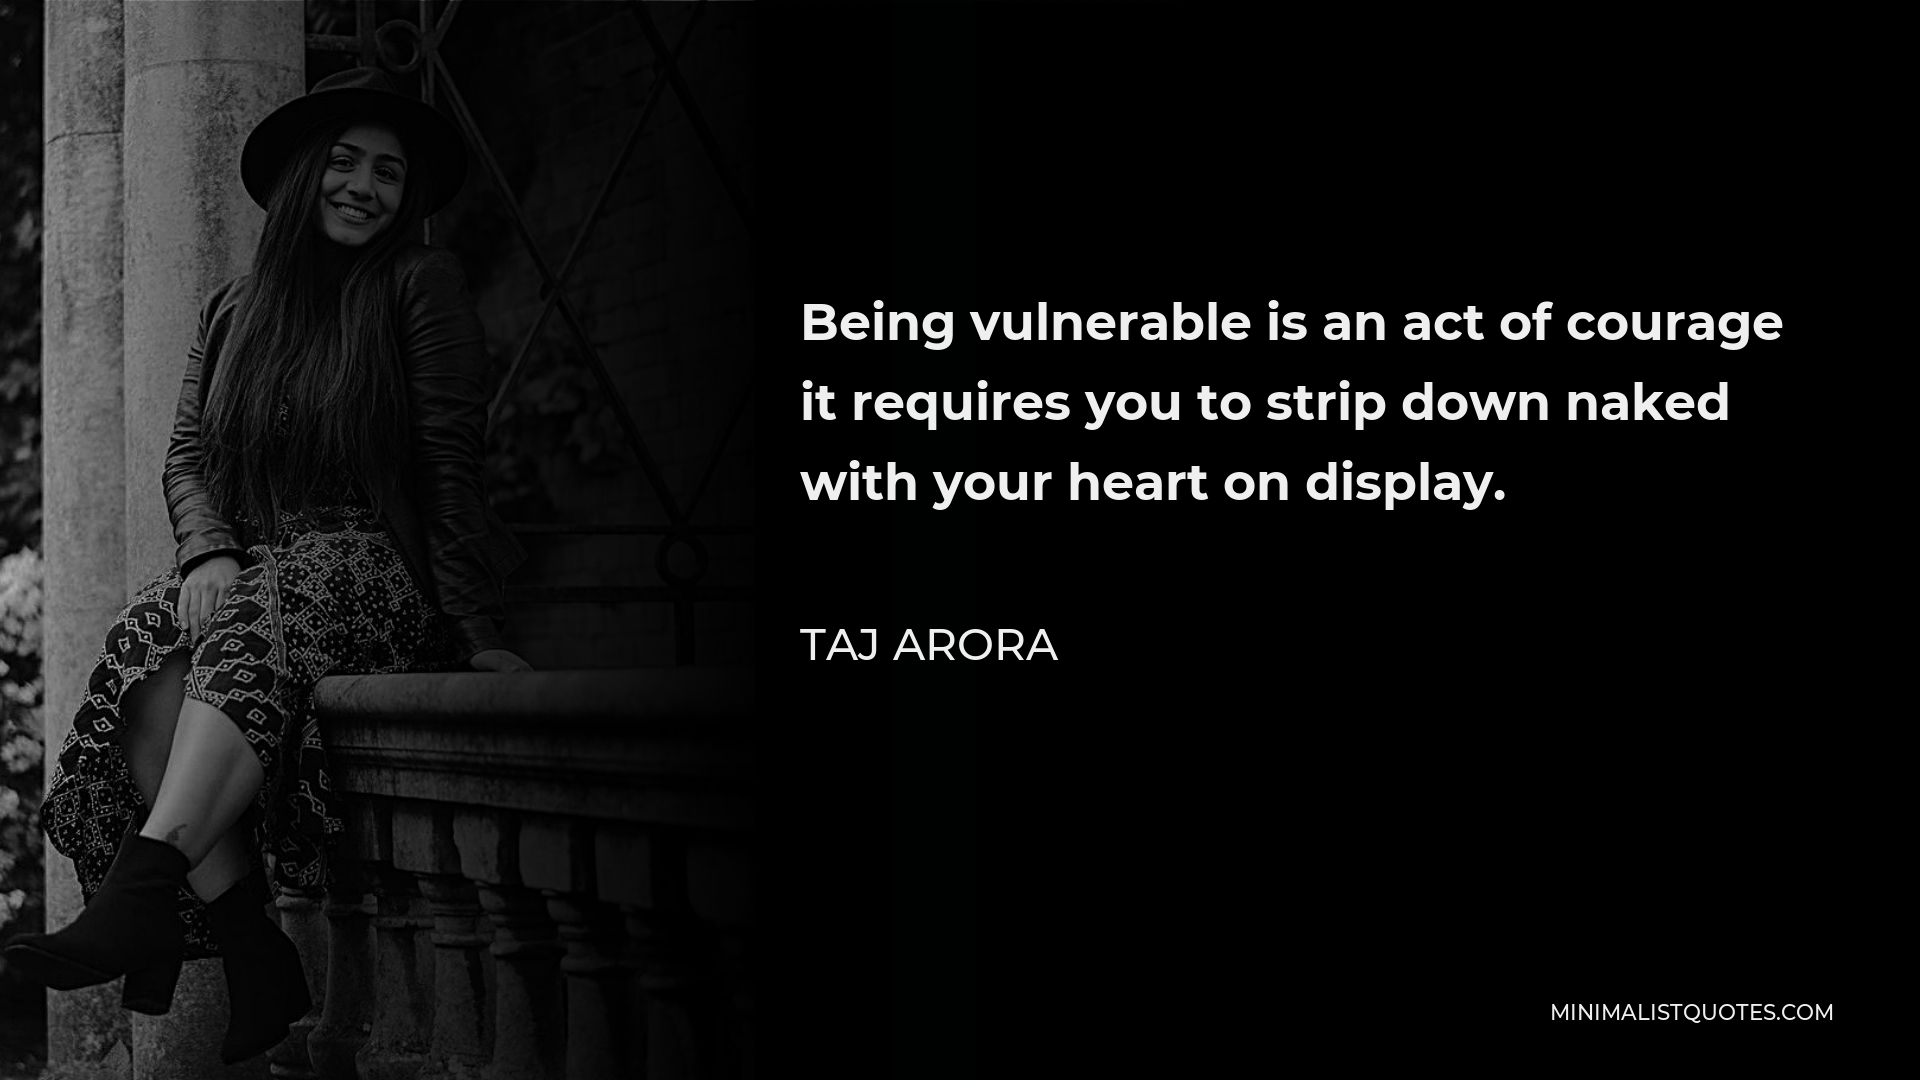 Taj Arora Quote - Being vulnerable is an act of courage it requires you to strip down naked with your heart on display.